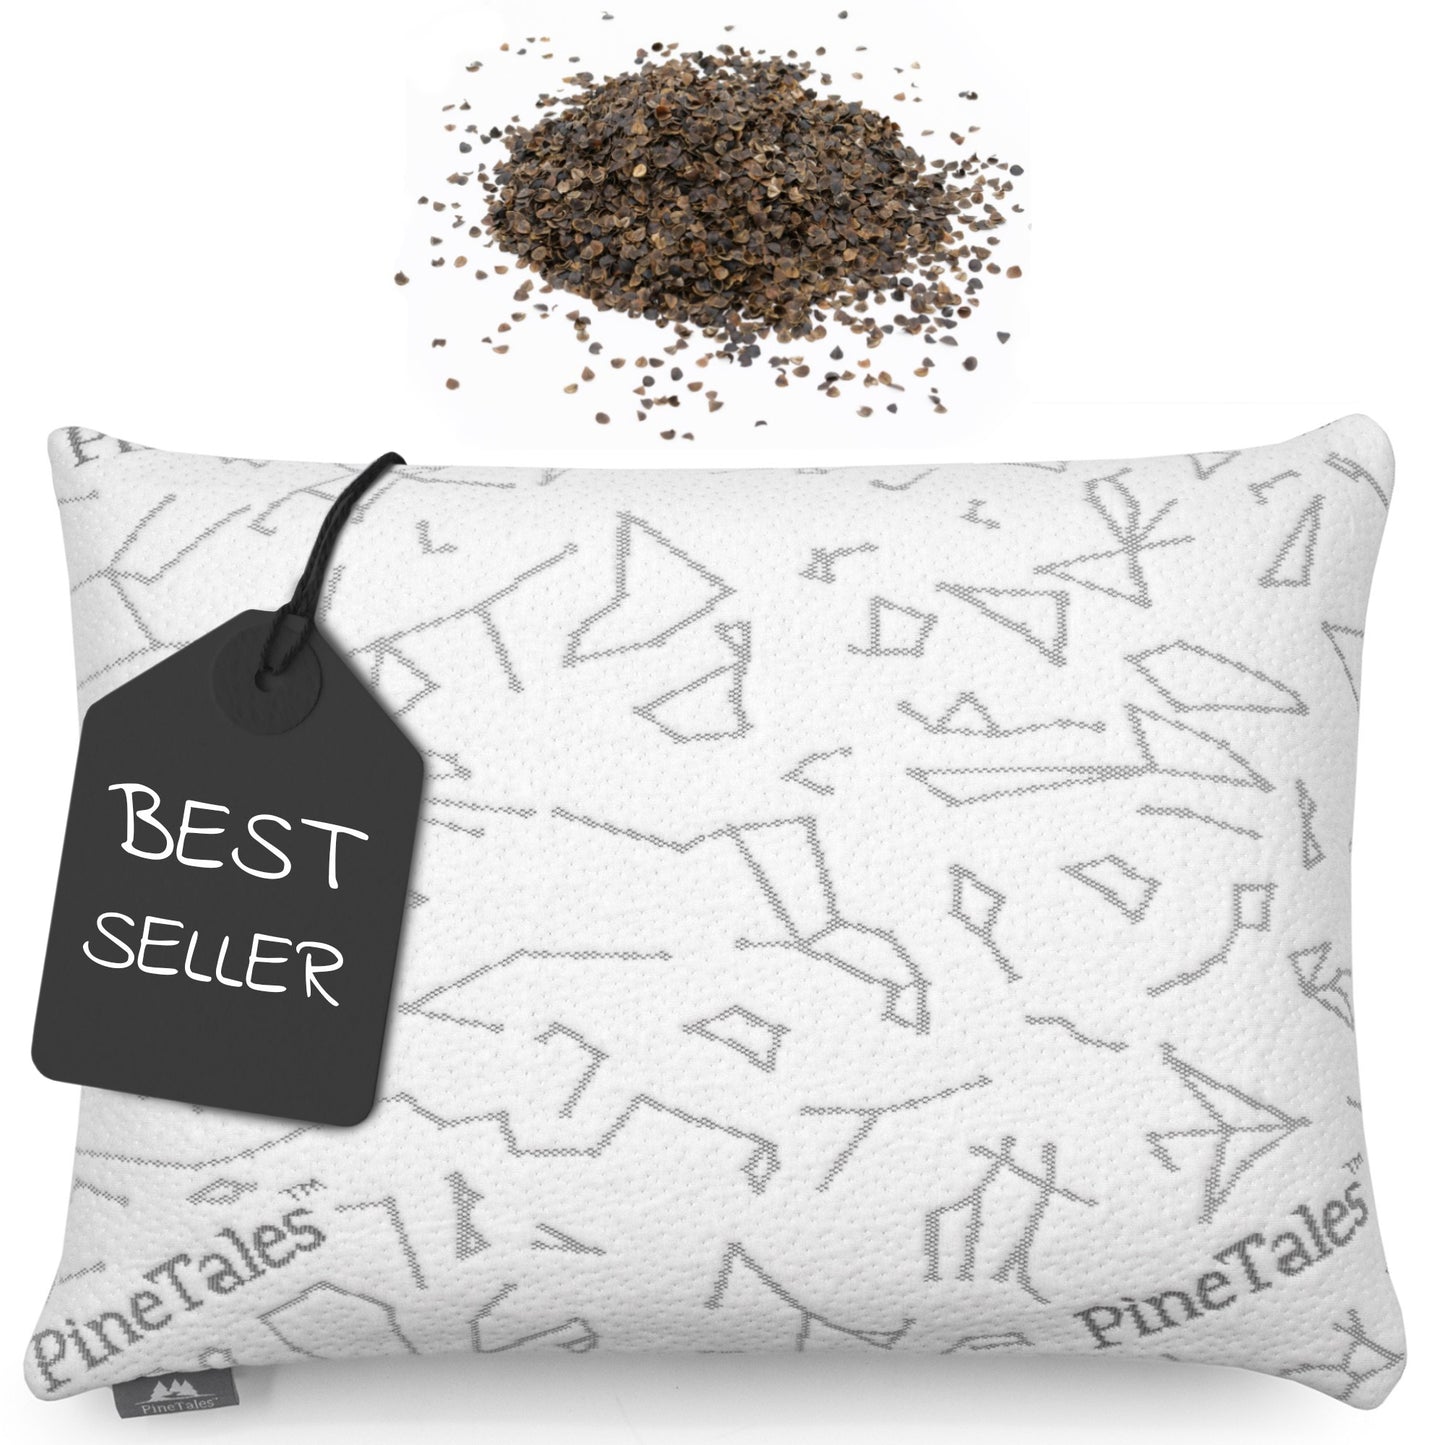 Buckwheat Pillow Model with Designer Bamboo Pillowcase by PineTales - STAR